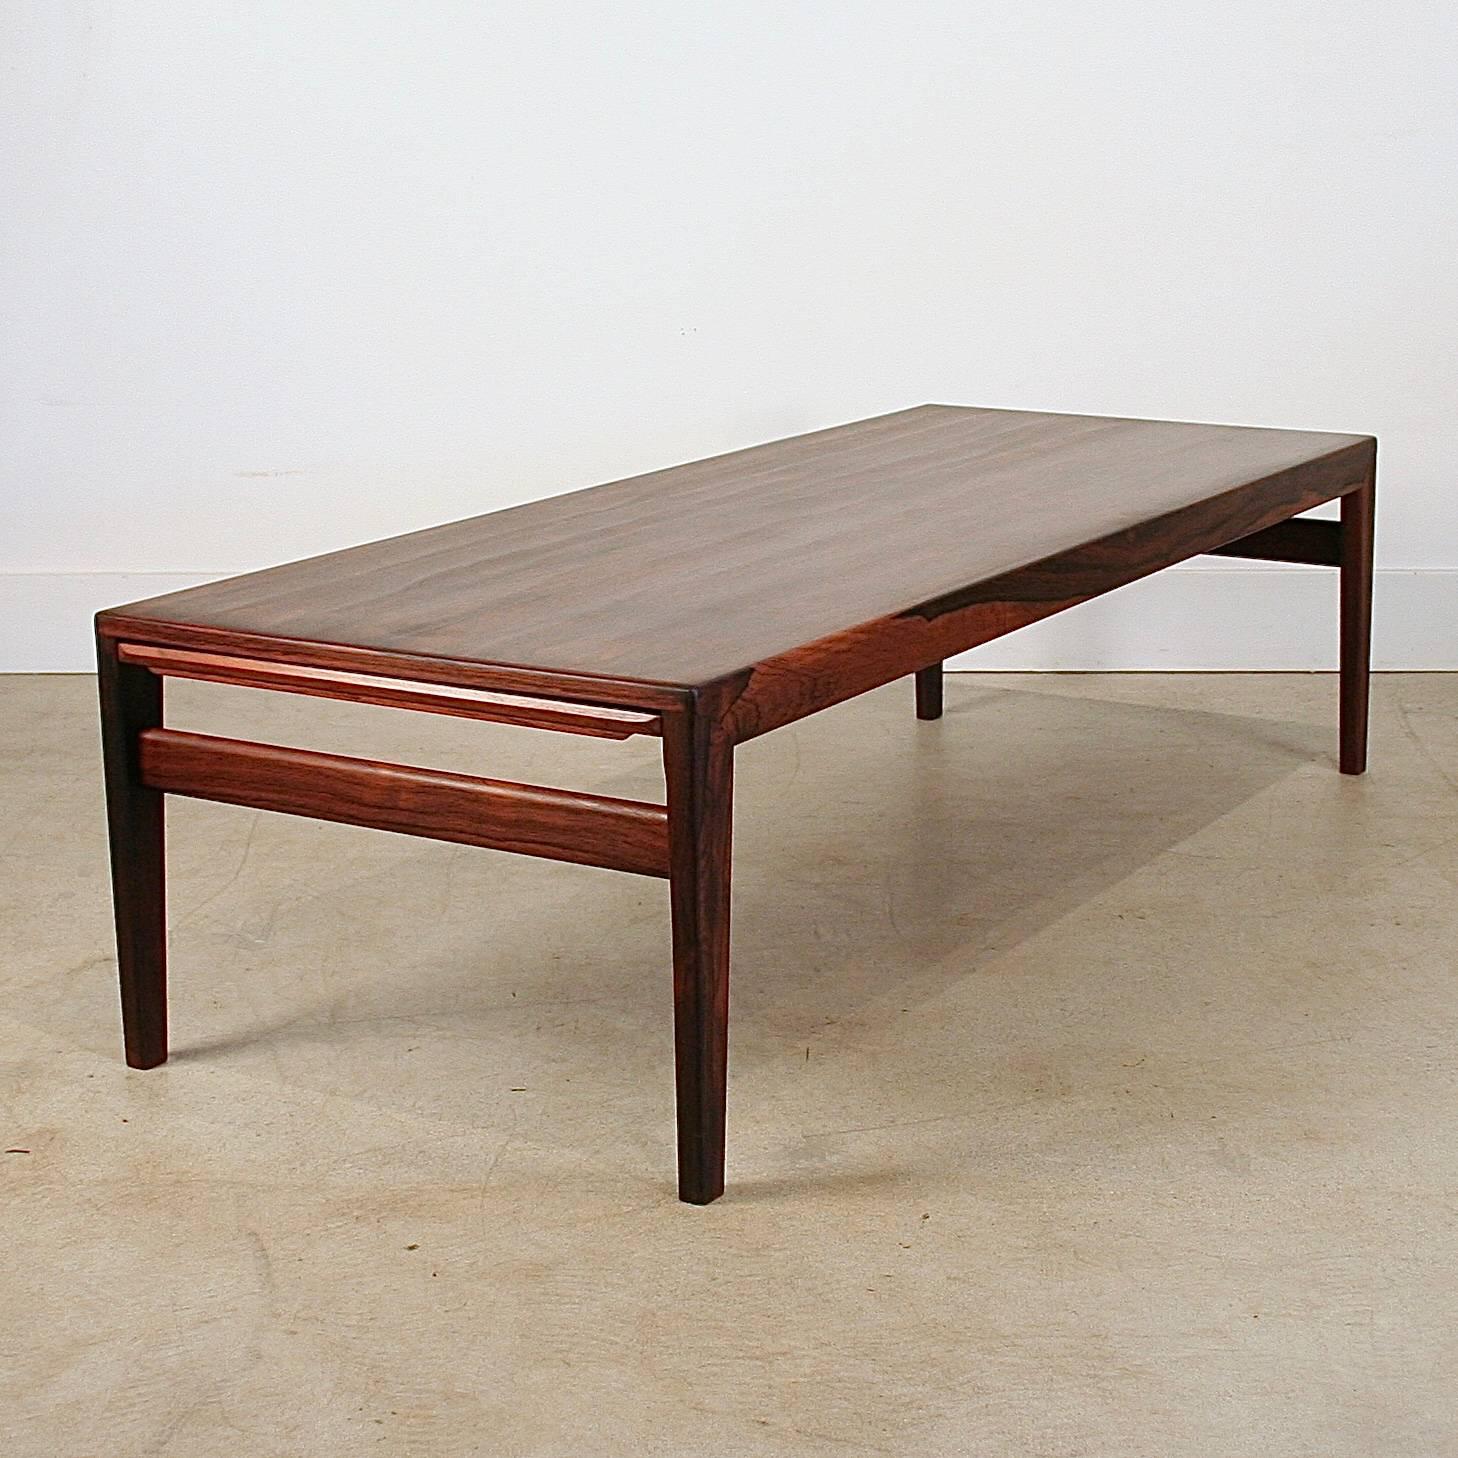 Absolutely stunning vintage Danish rosewood coffee table. Features two leaves on each end which slide out with the help of a wonderfully crafted finger pull. One leaf has the same beautiful graining as the tabletop and one is suitable for hot cups